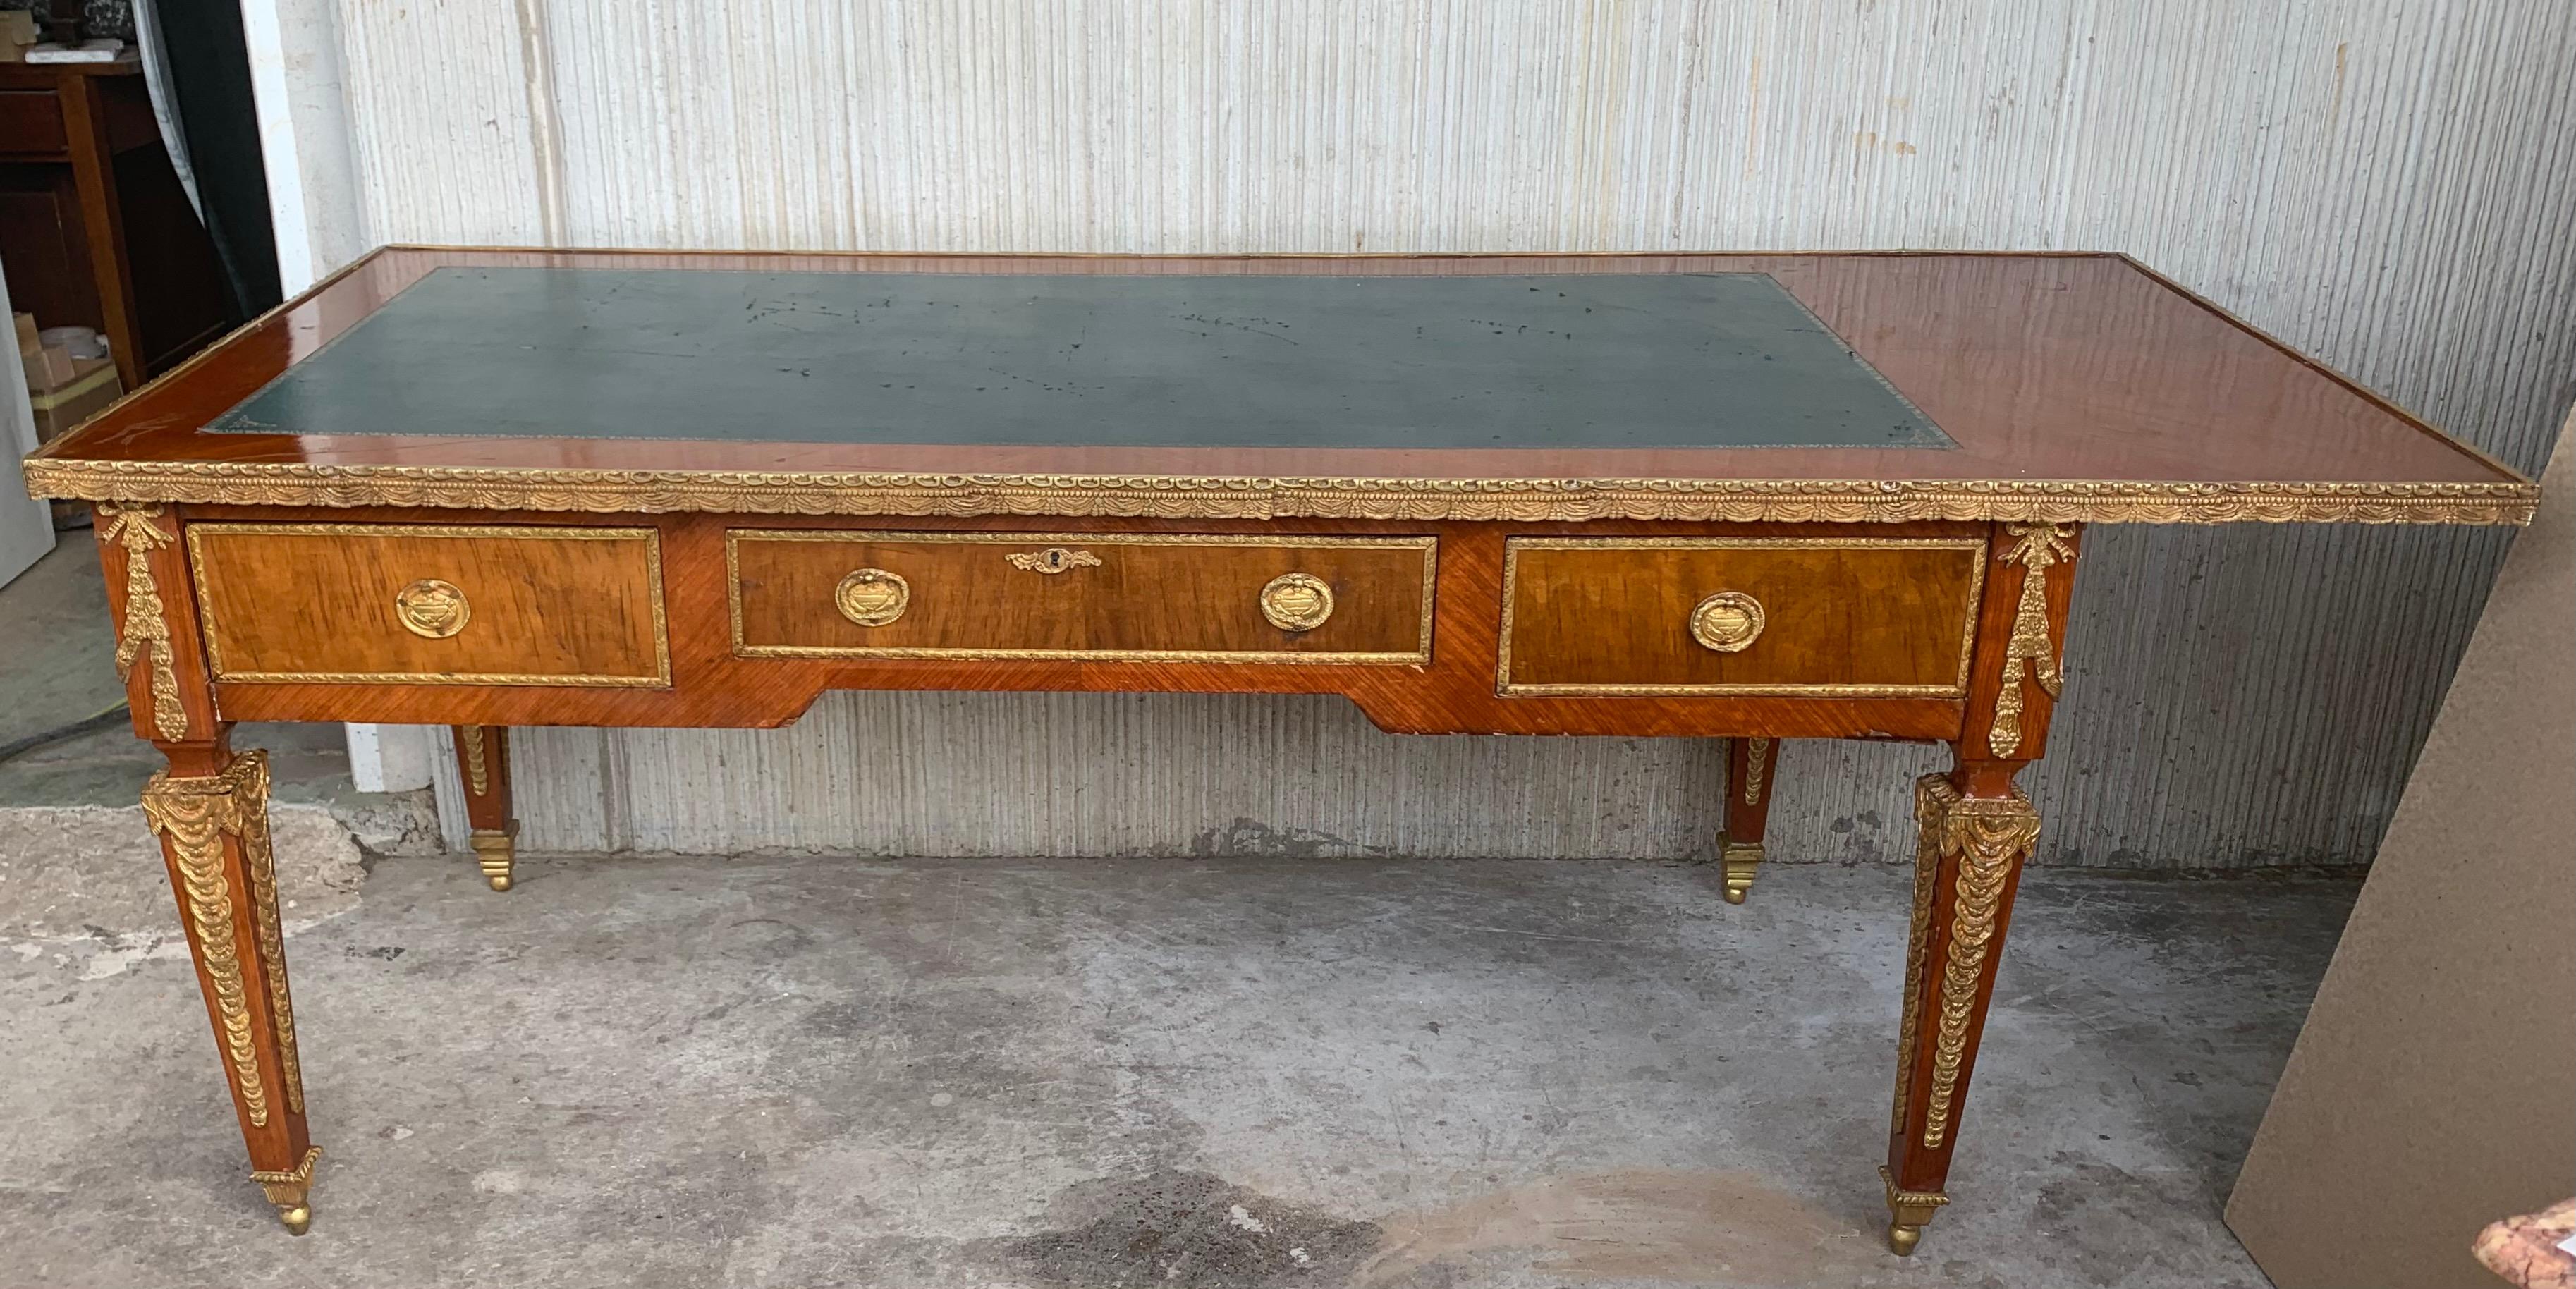 Crafted in Paris, France, circa 1870 in the style of Francois Linke and built of walnut , the large antique desk stands on elegant cabriole legs decorated at the shoulder with bronze figural floral decorations, and ending with gilt bronze sabots at